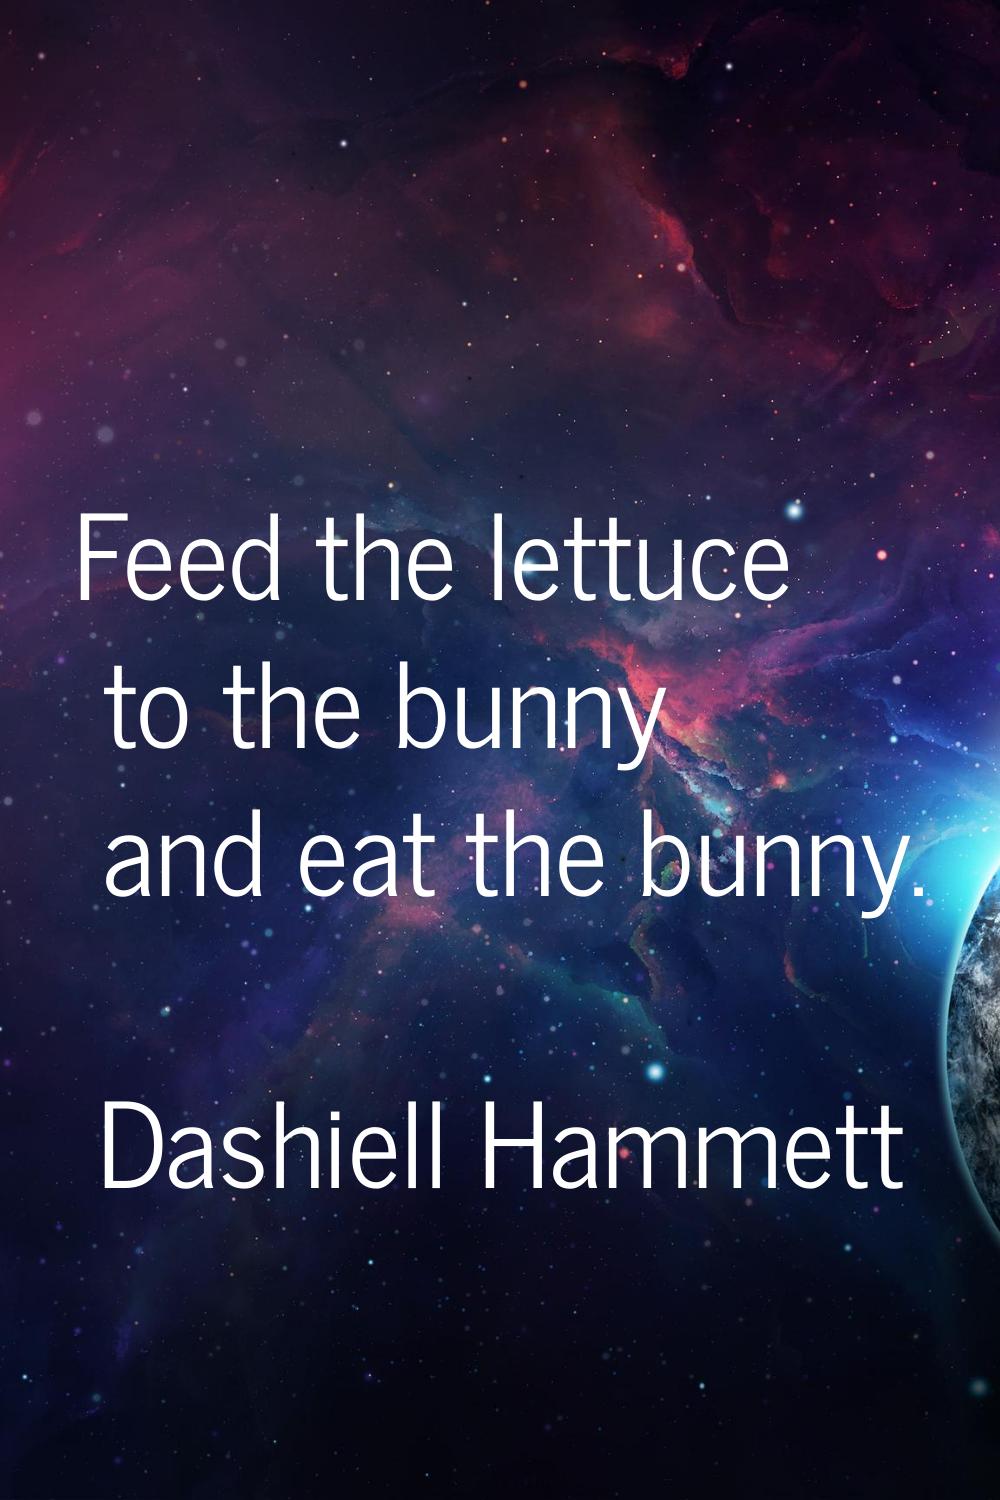 Feed the lettuce to the bunny and eat the bunny.